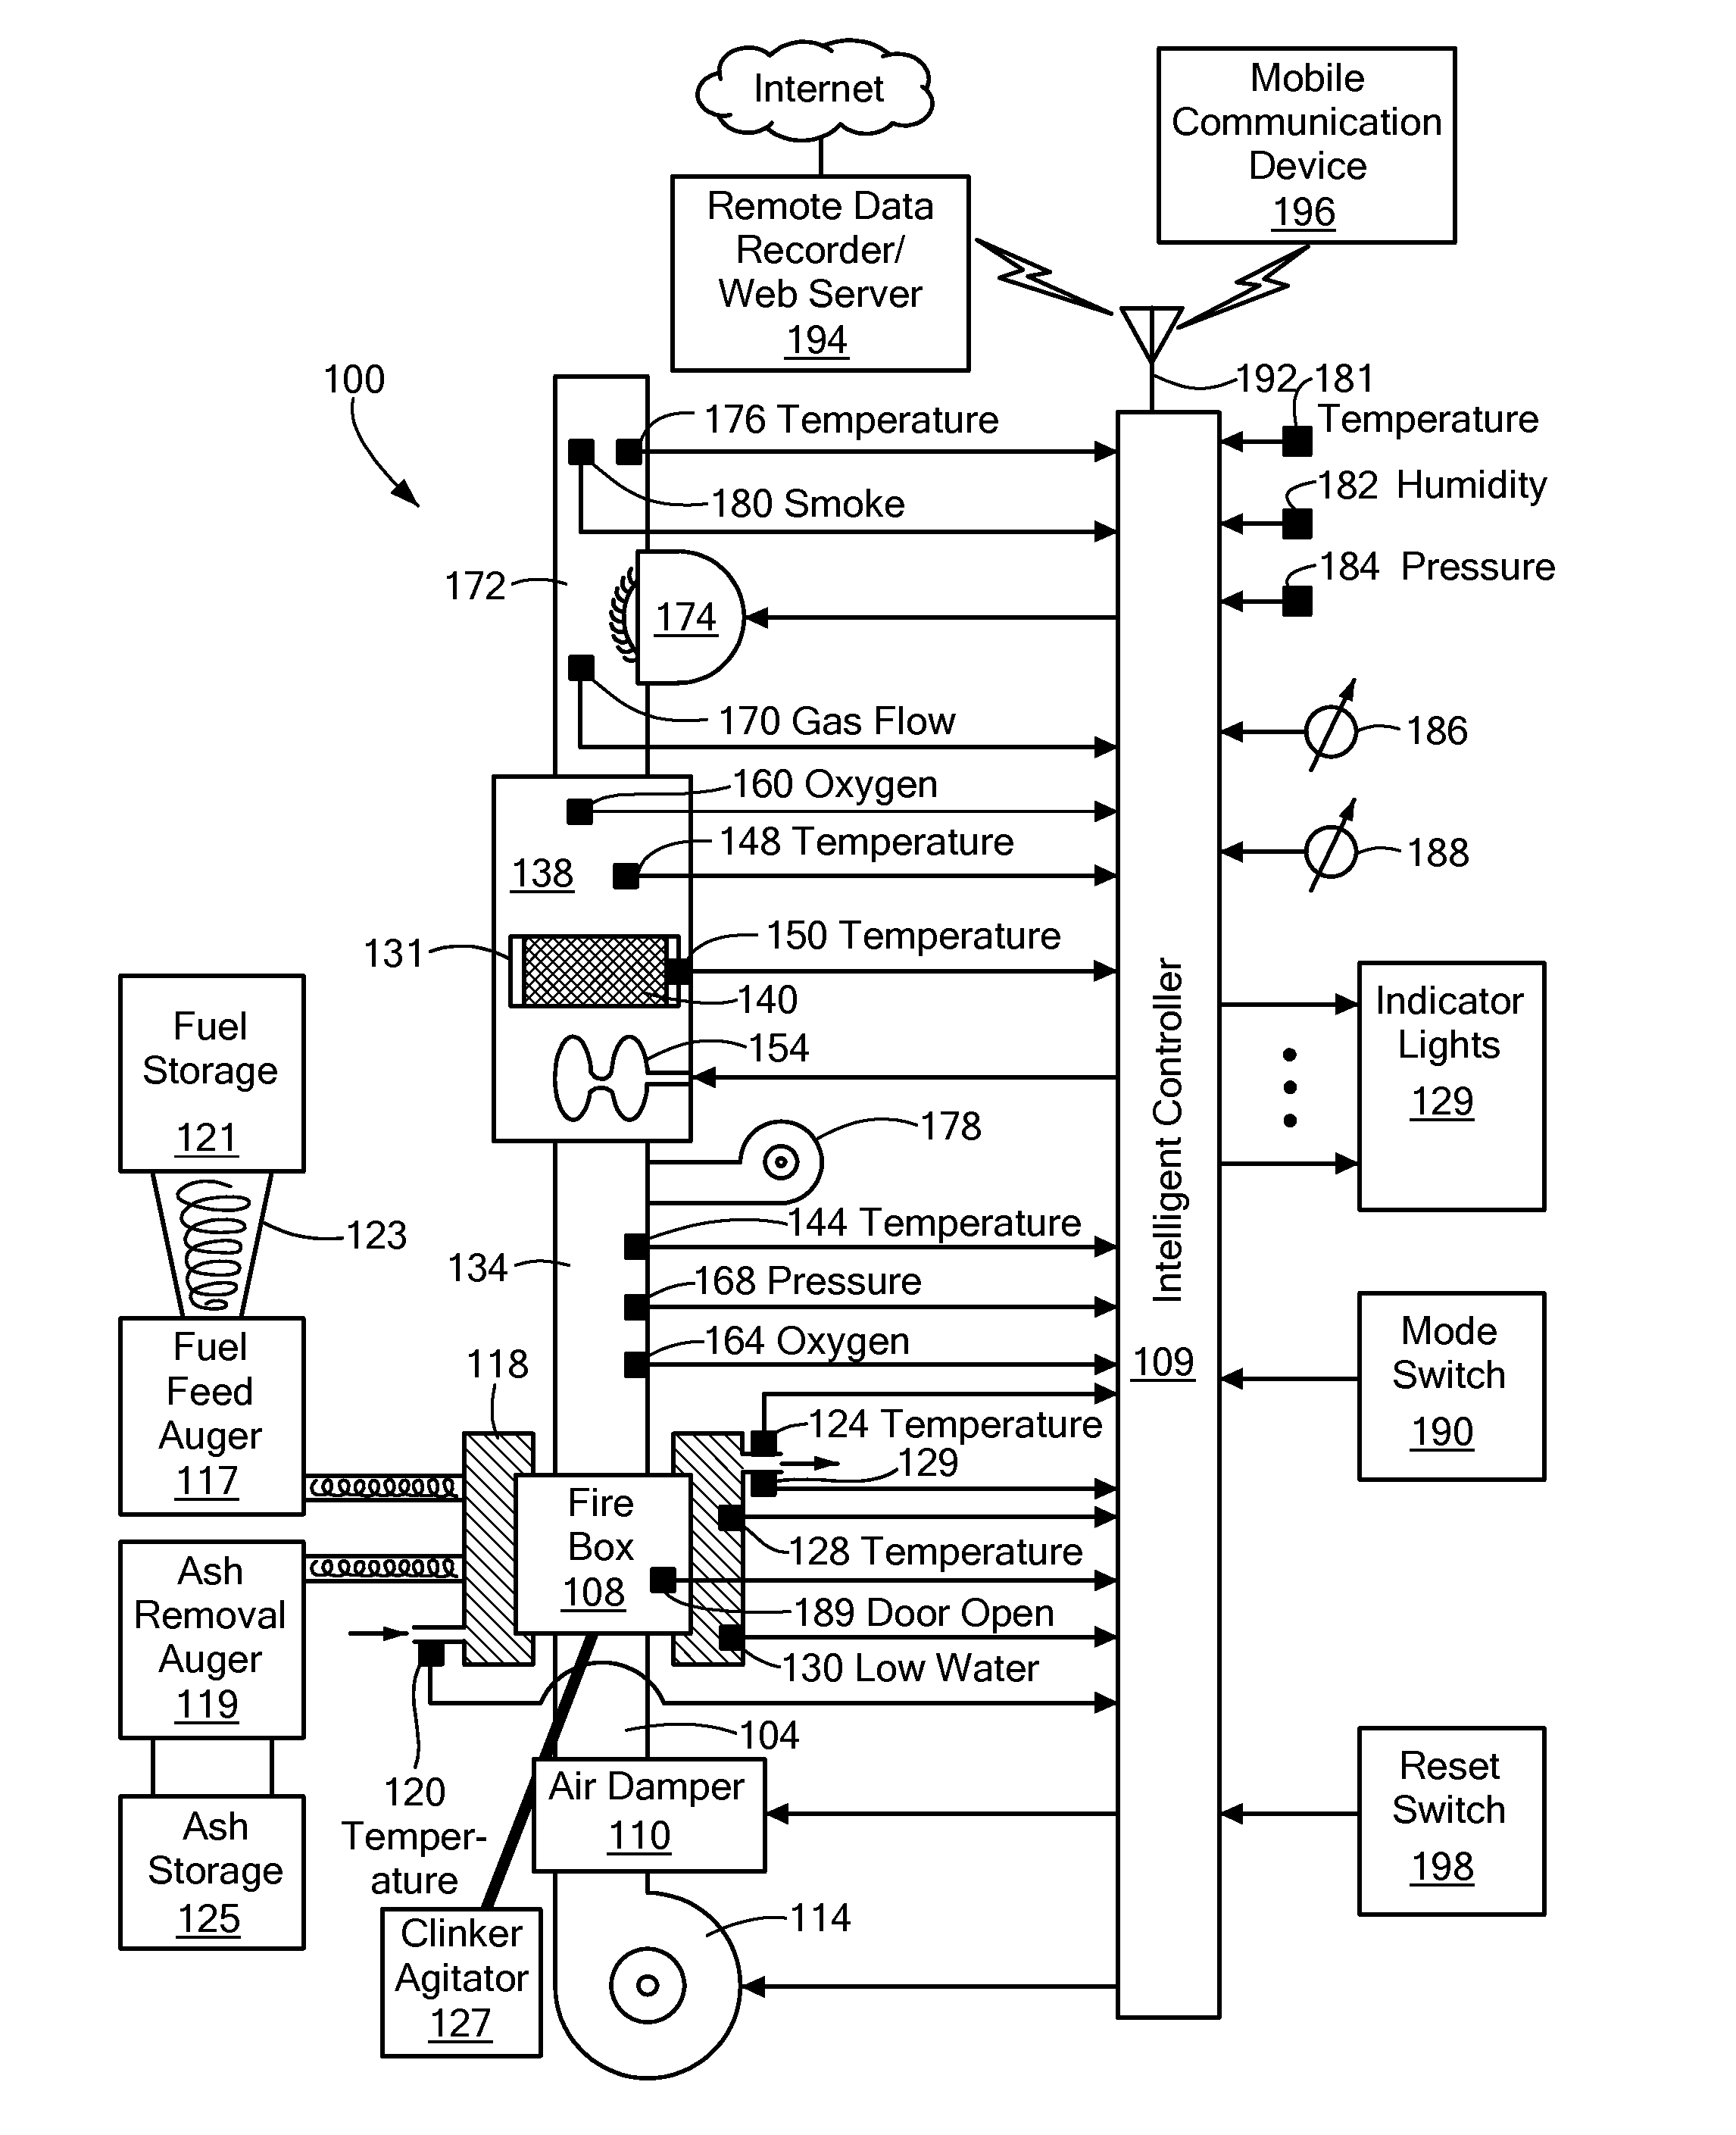 Fuel Feed and Air Feed Controller for Biofuel-Fired Furnace